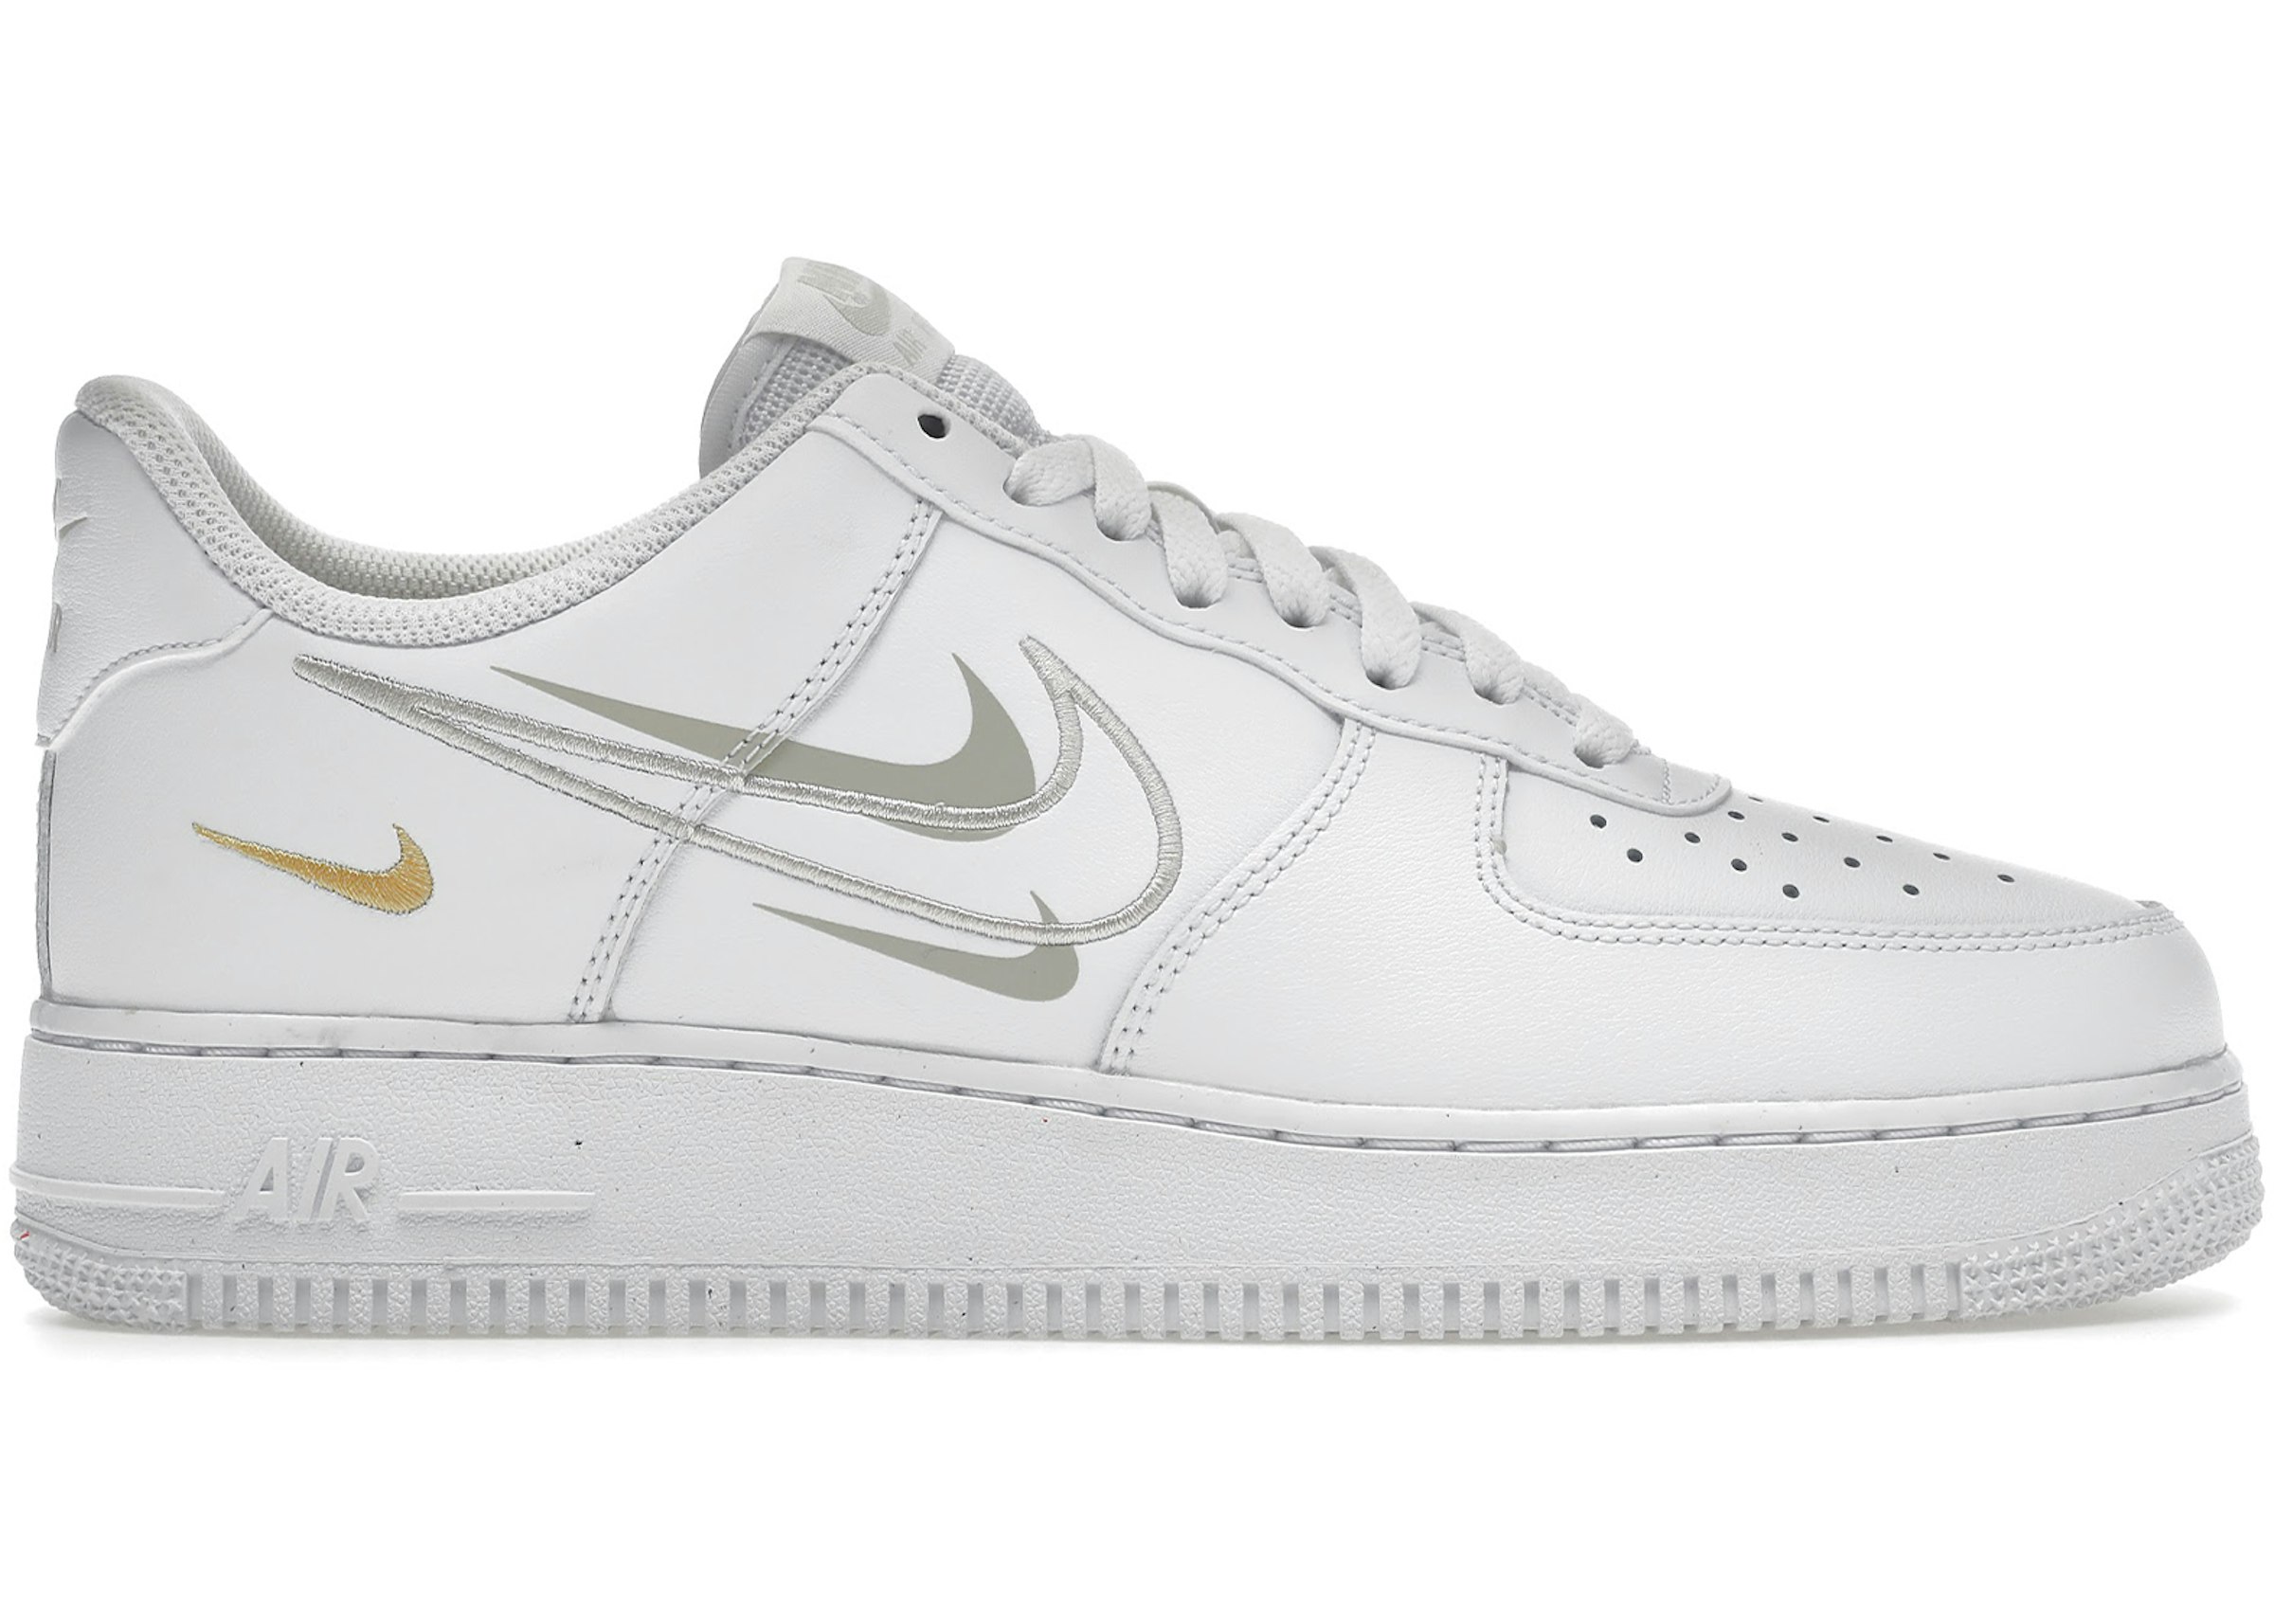 Intacto Pocos victoria Nike Air Force 1 Low Multi-Swoosh White Yellow Men's - DX2650-100 - US